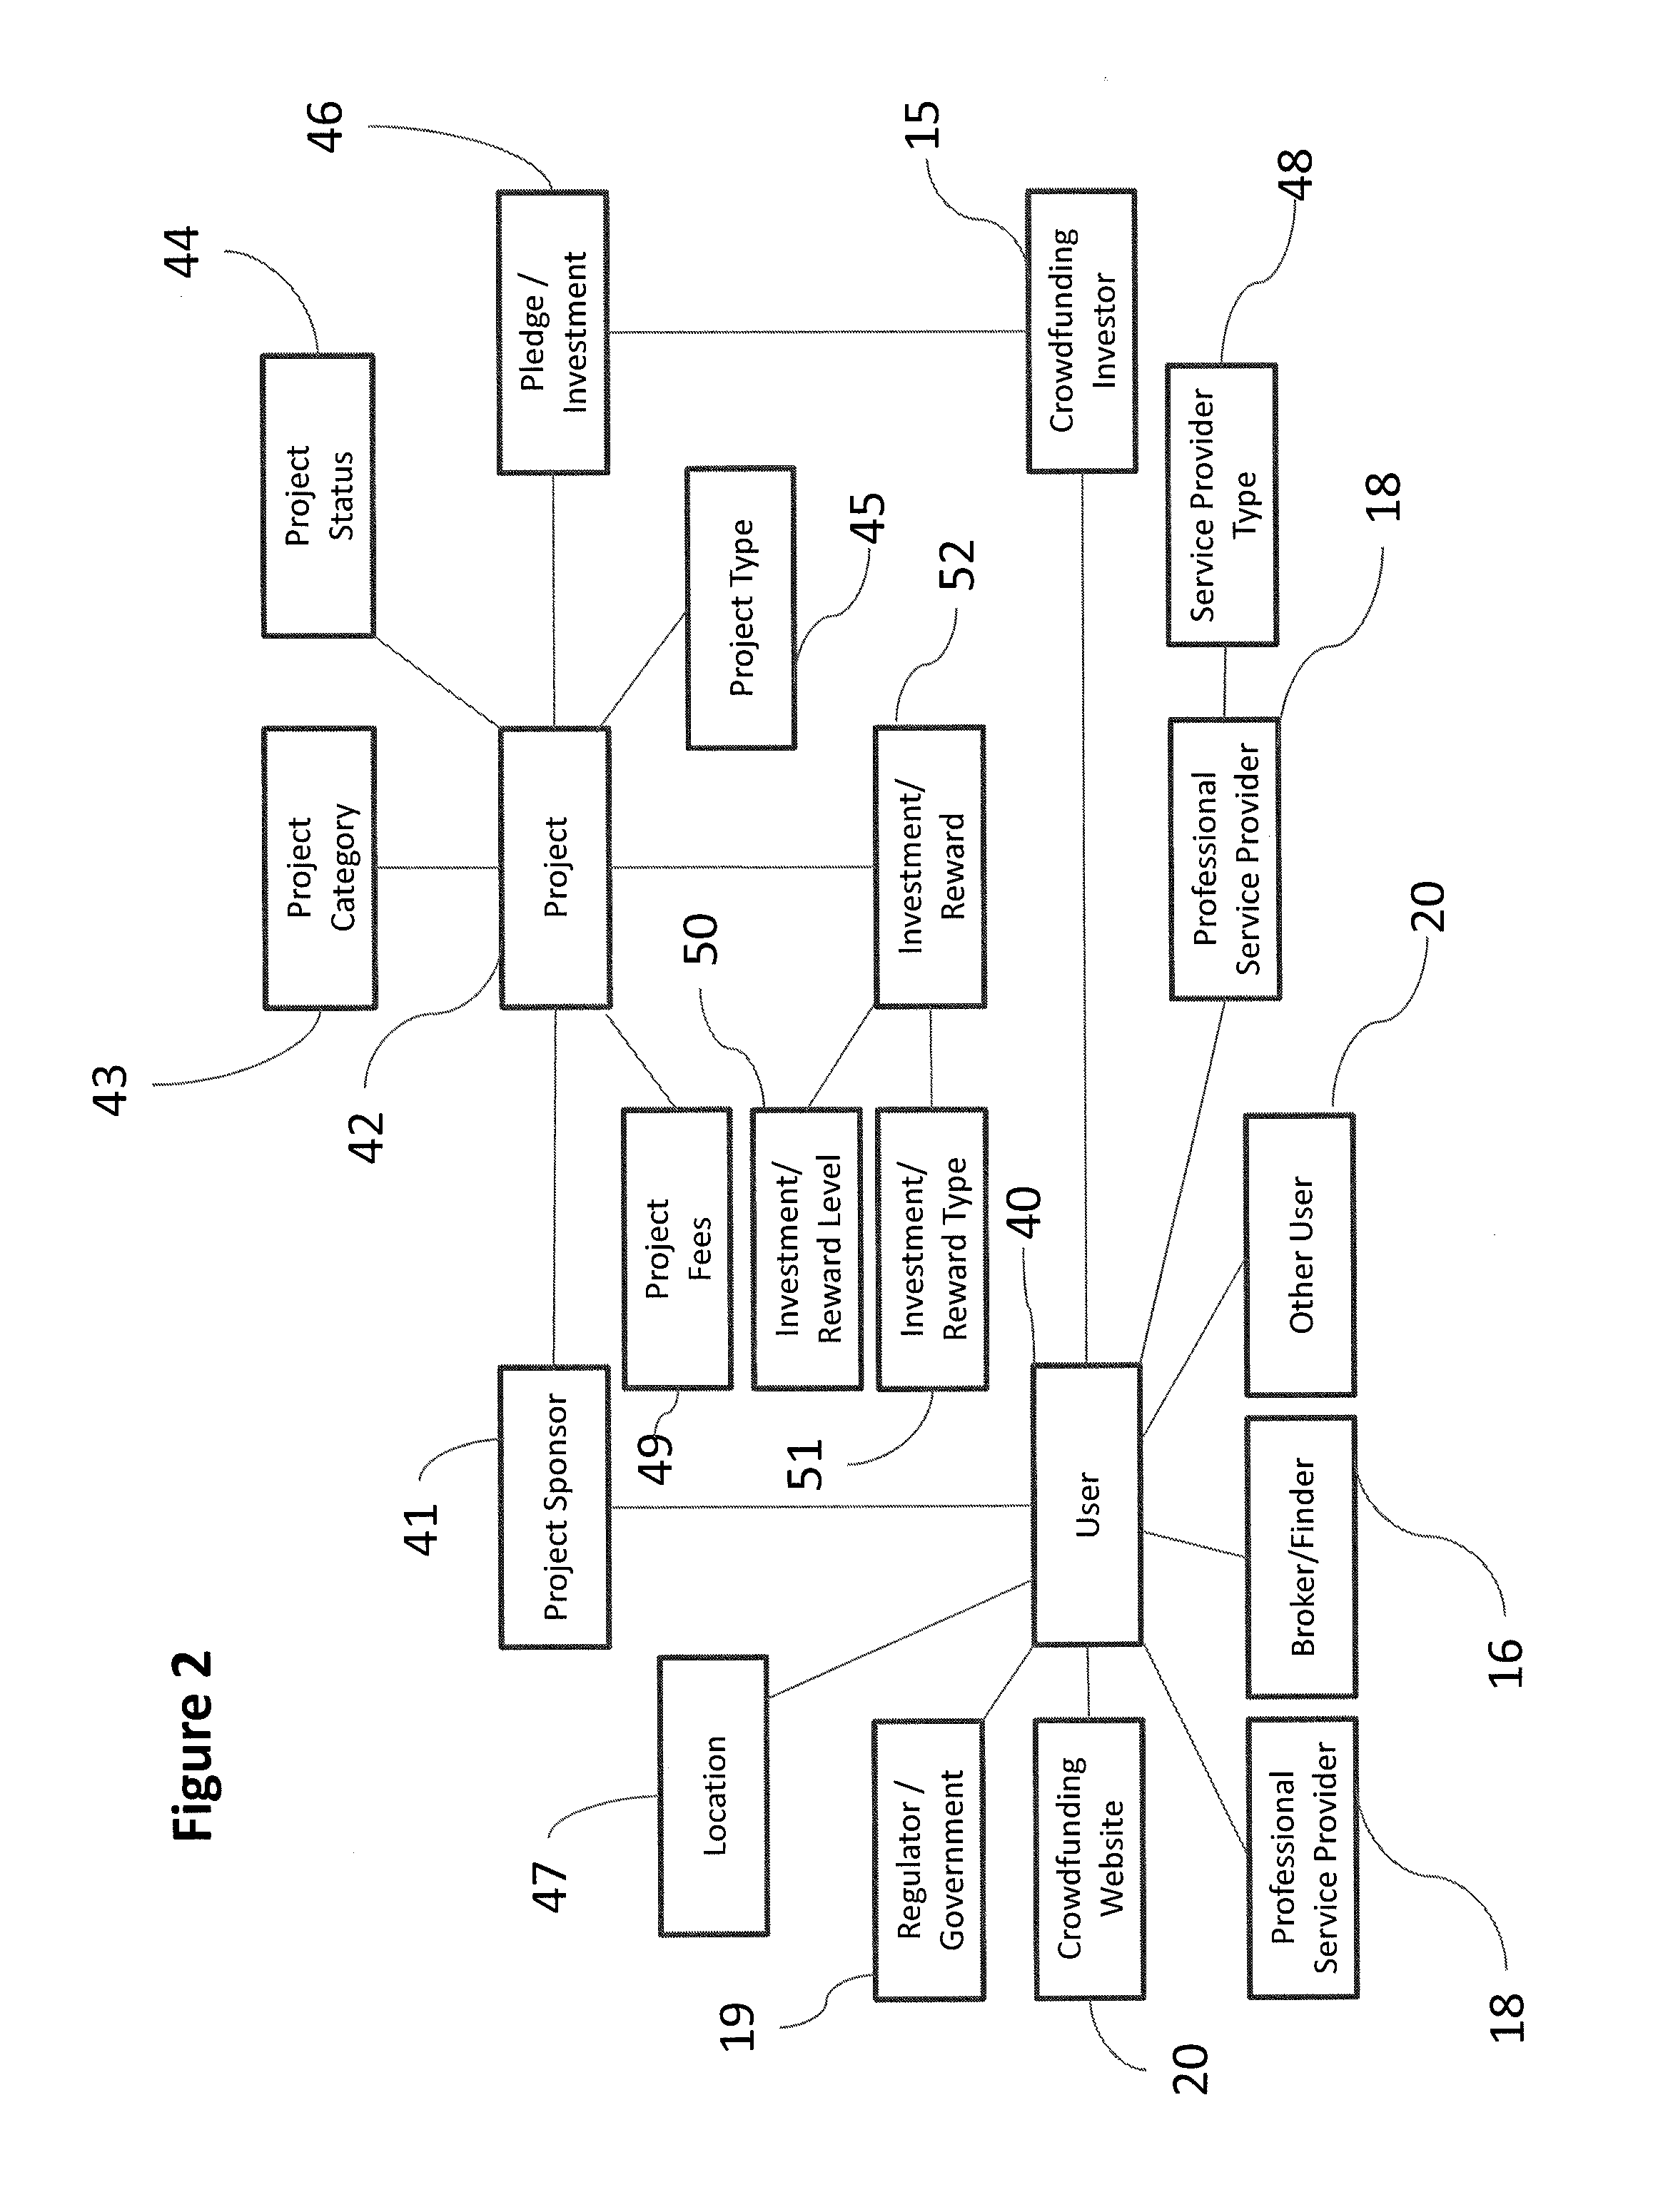 System and Method of Data Collection, Analysis and Distribution